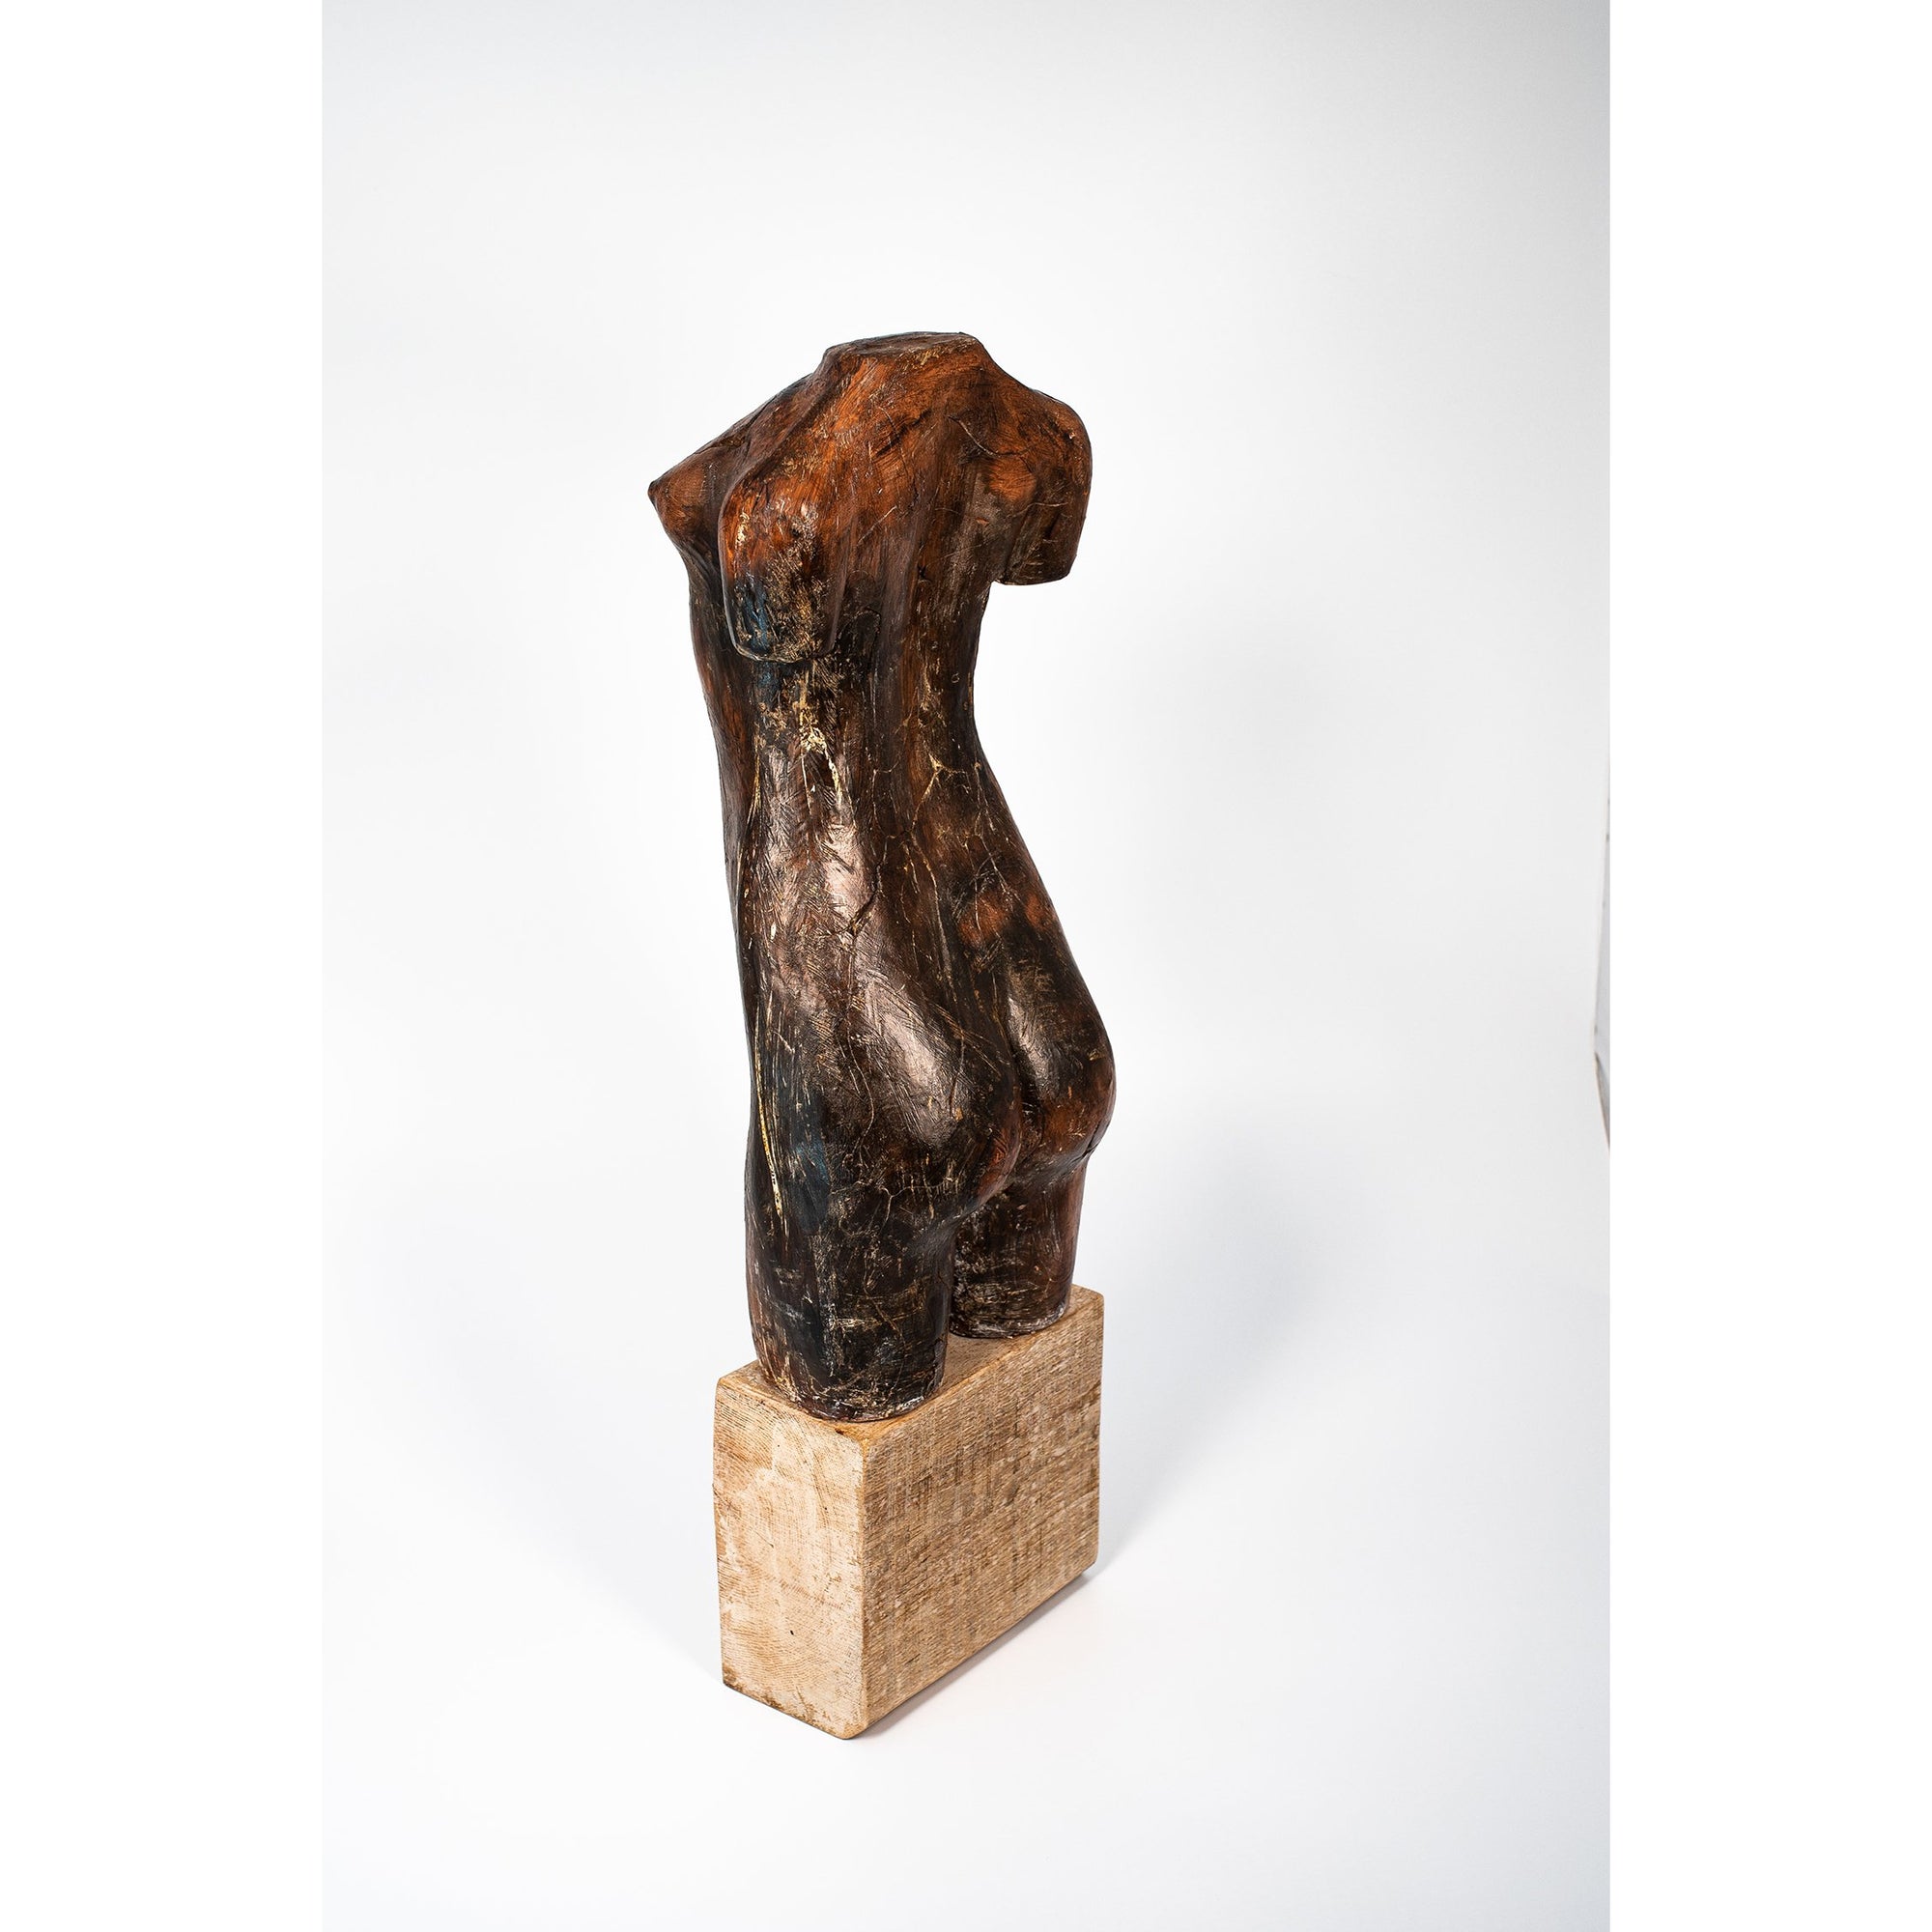 OK, Glazed terracotta standing figure on a block, by Sophie Howard, available from Padstow Gallery, Cornwall